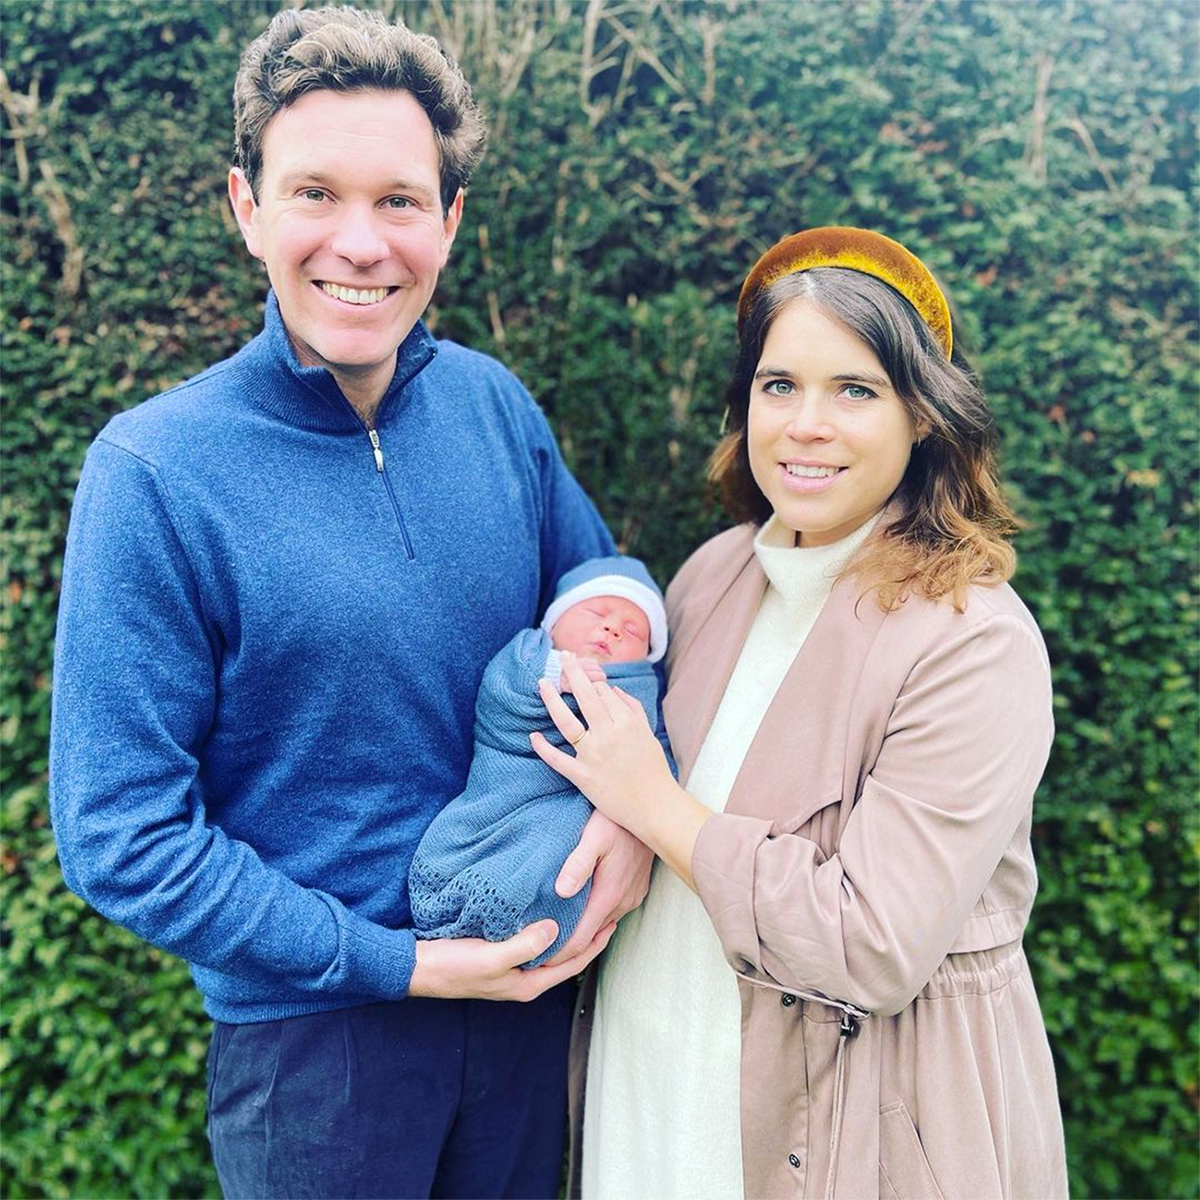 Princess Eugenie posts the first complete photo of her baby and reveals the name